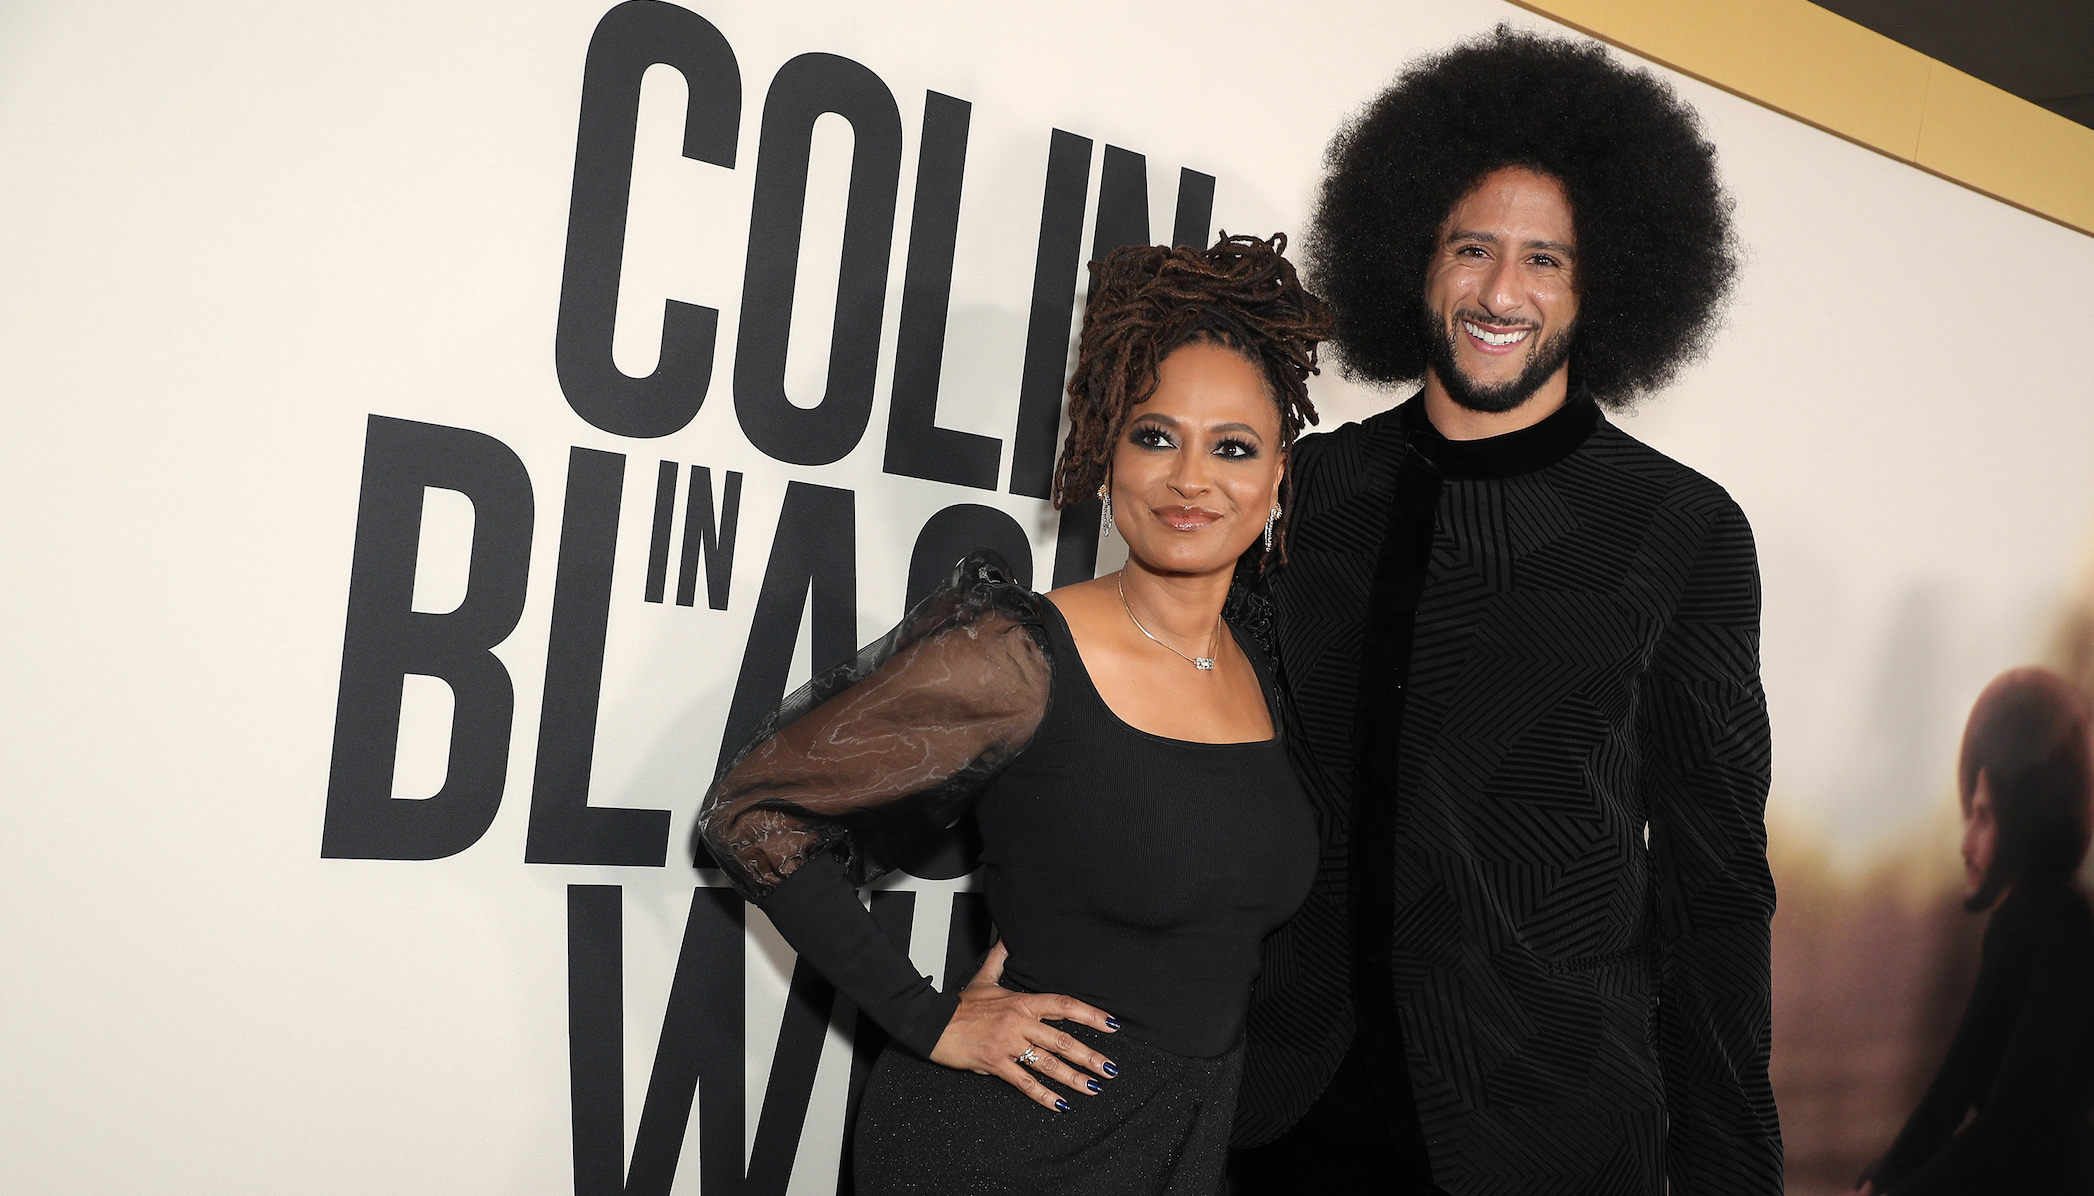 Colin in Black and White Ava DuVernay and Directors Talk Black Masculinity pic